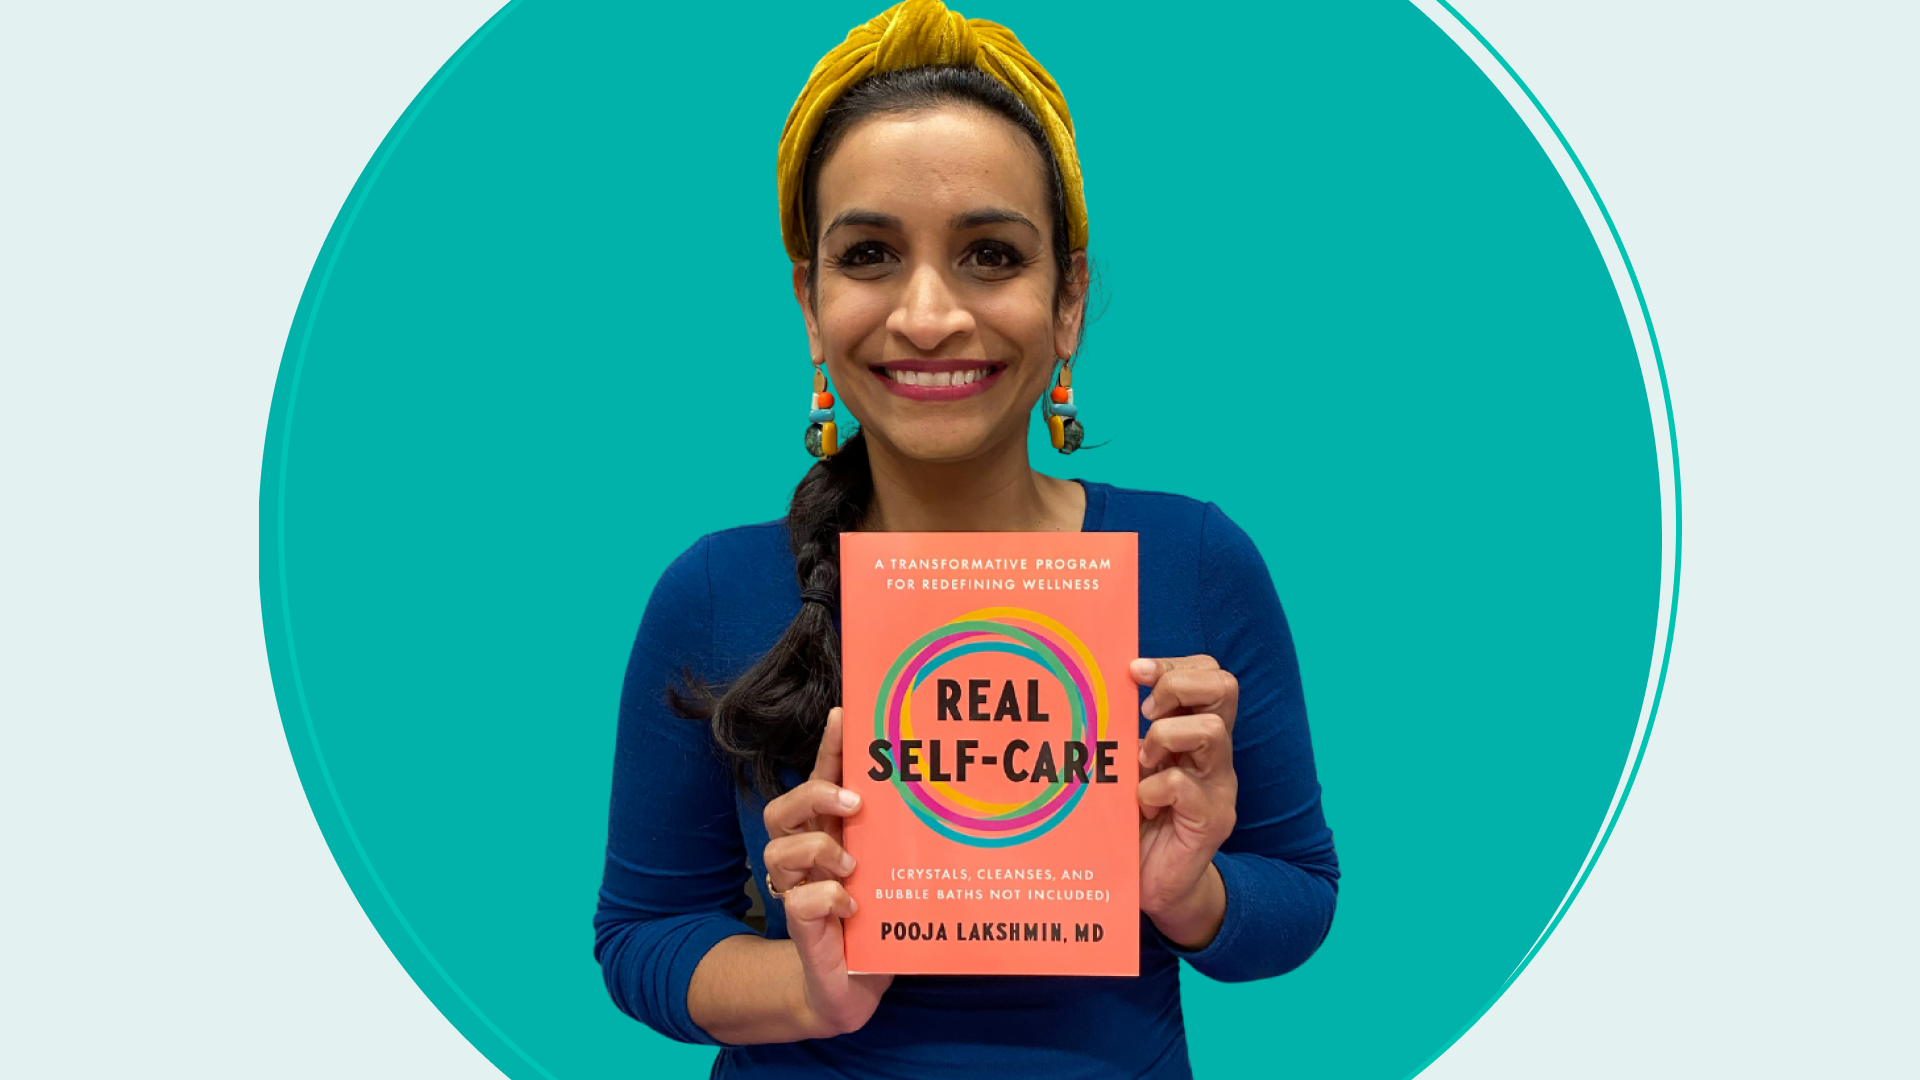 Pooja Lakshmin holding her book "Real Self-Care"